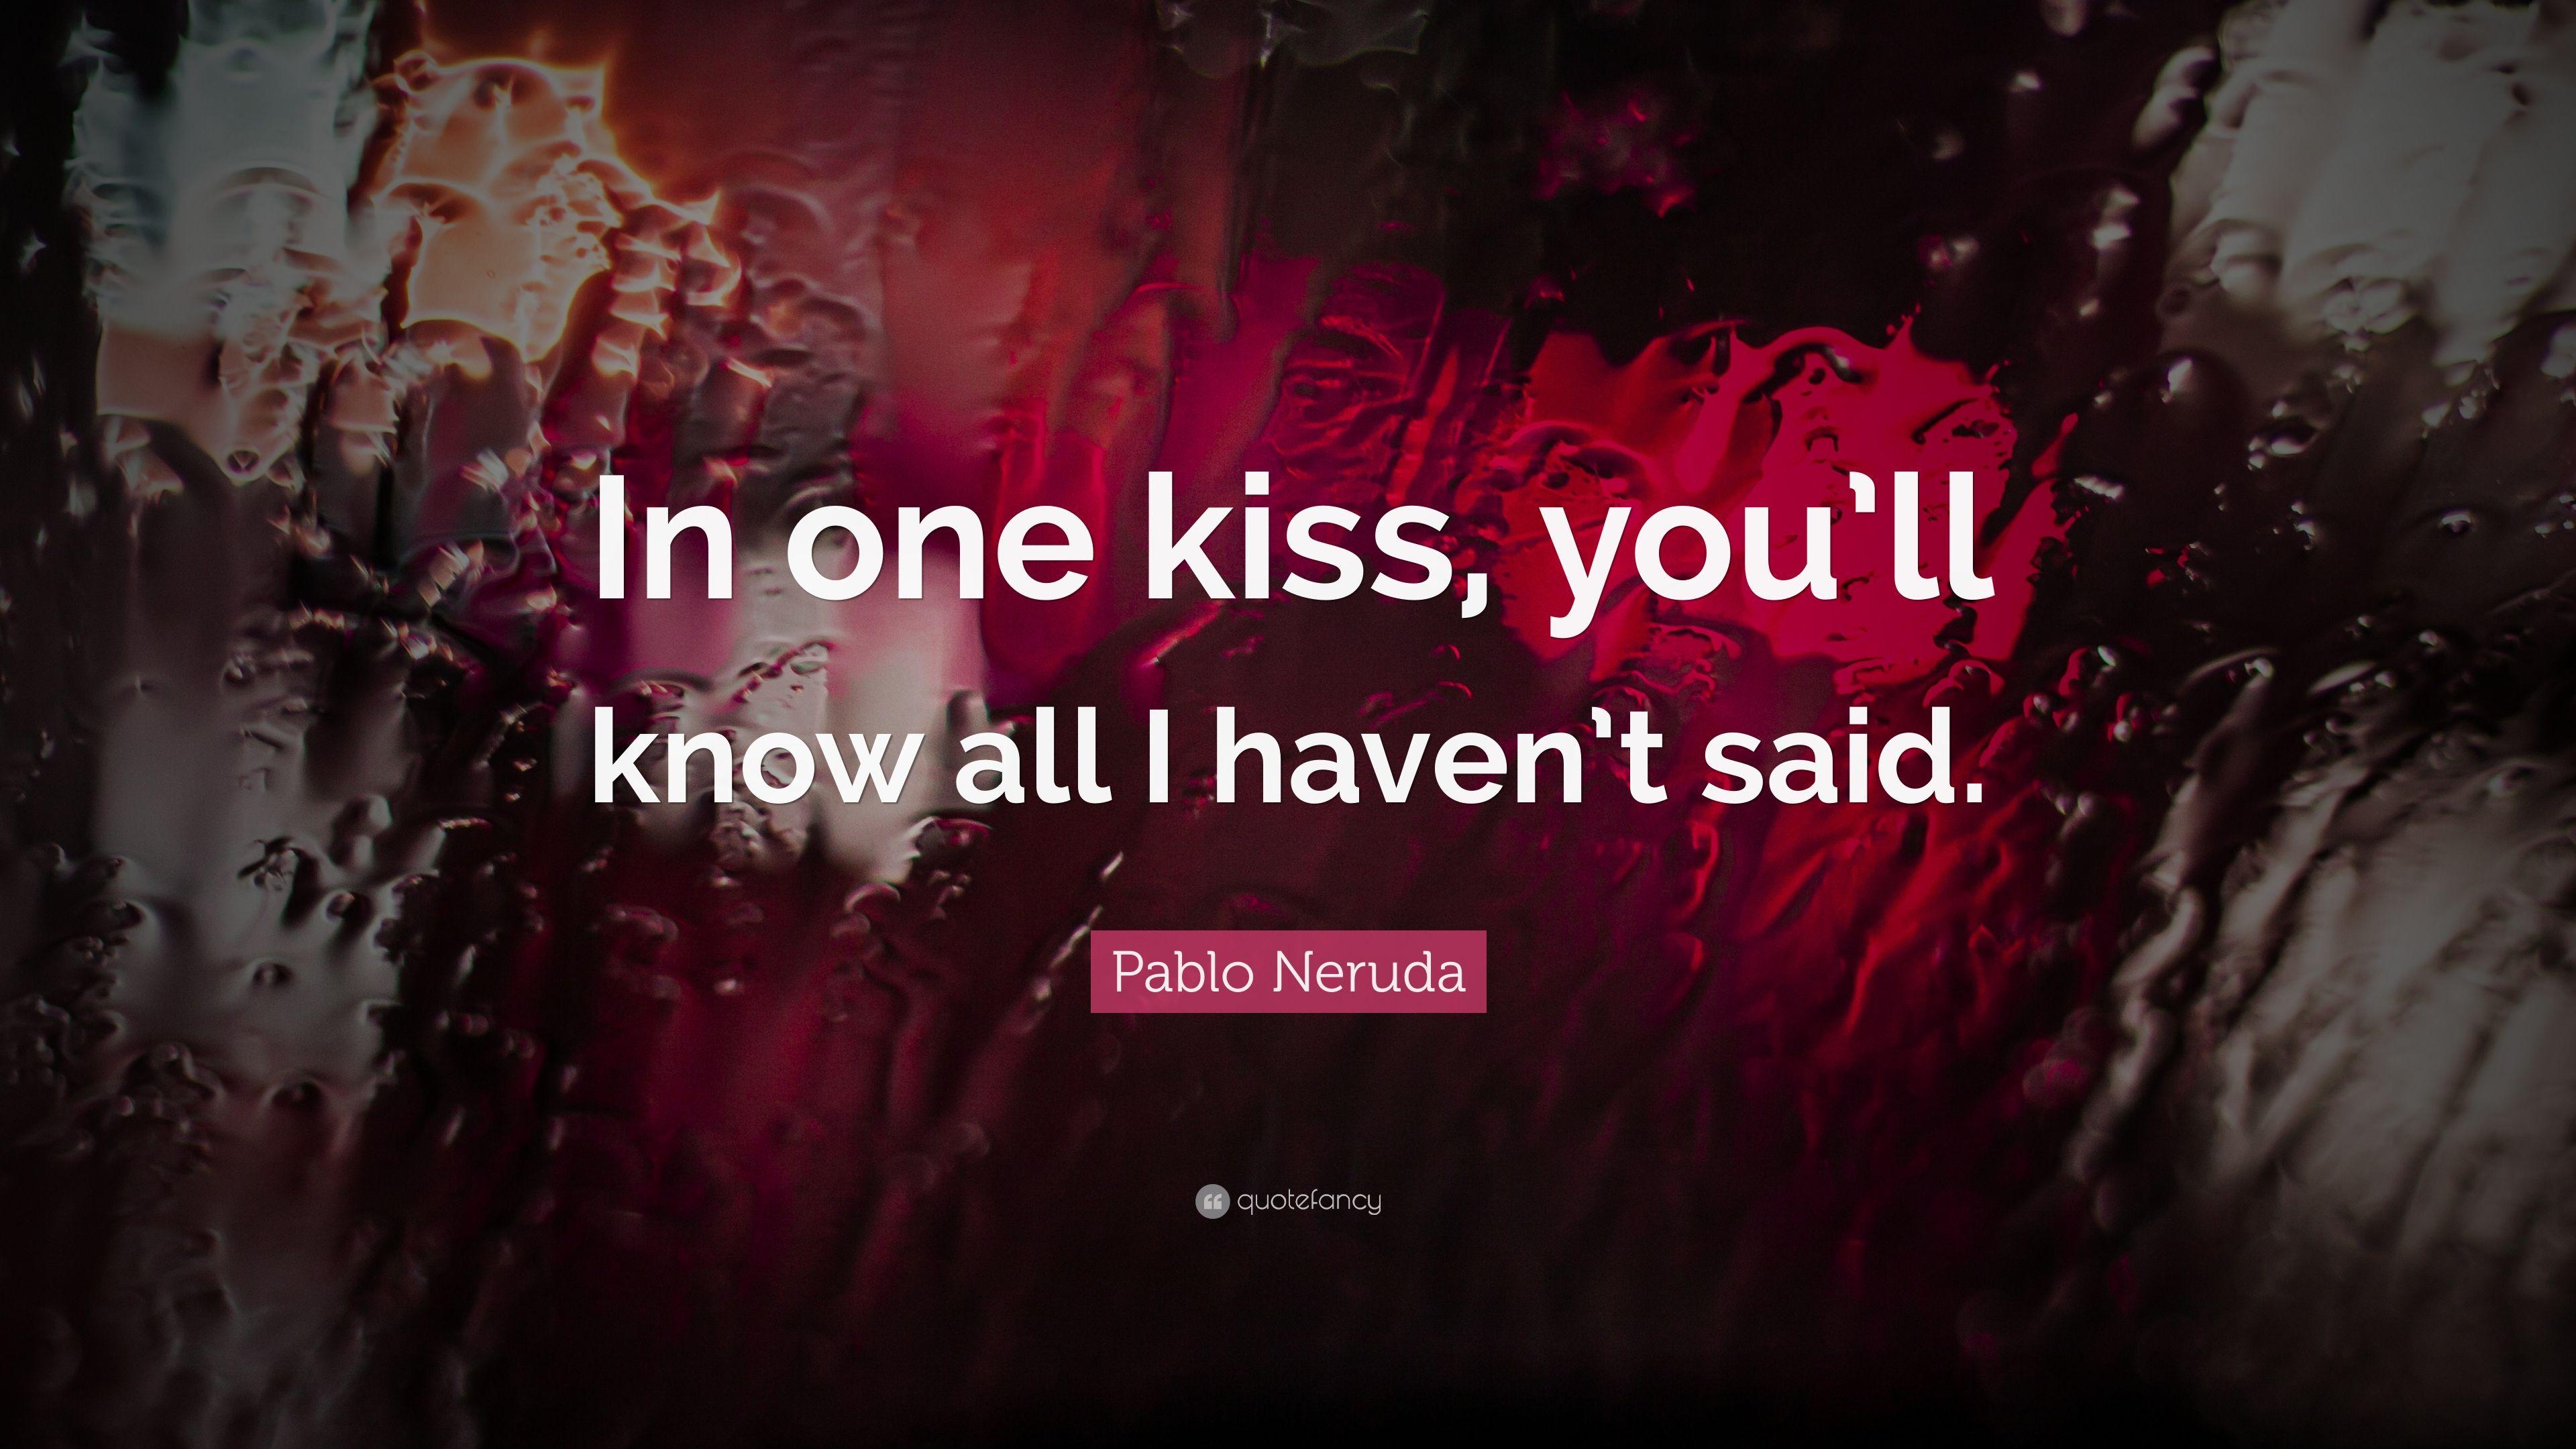 Pablo Neruda Quote: “In one kiss, you'll know all I haven't said